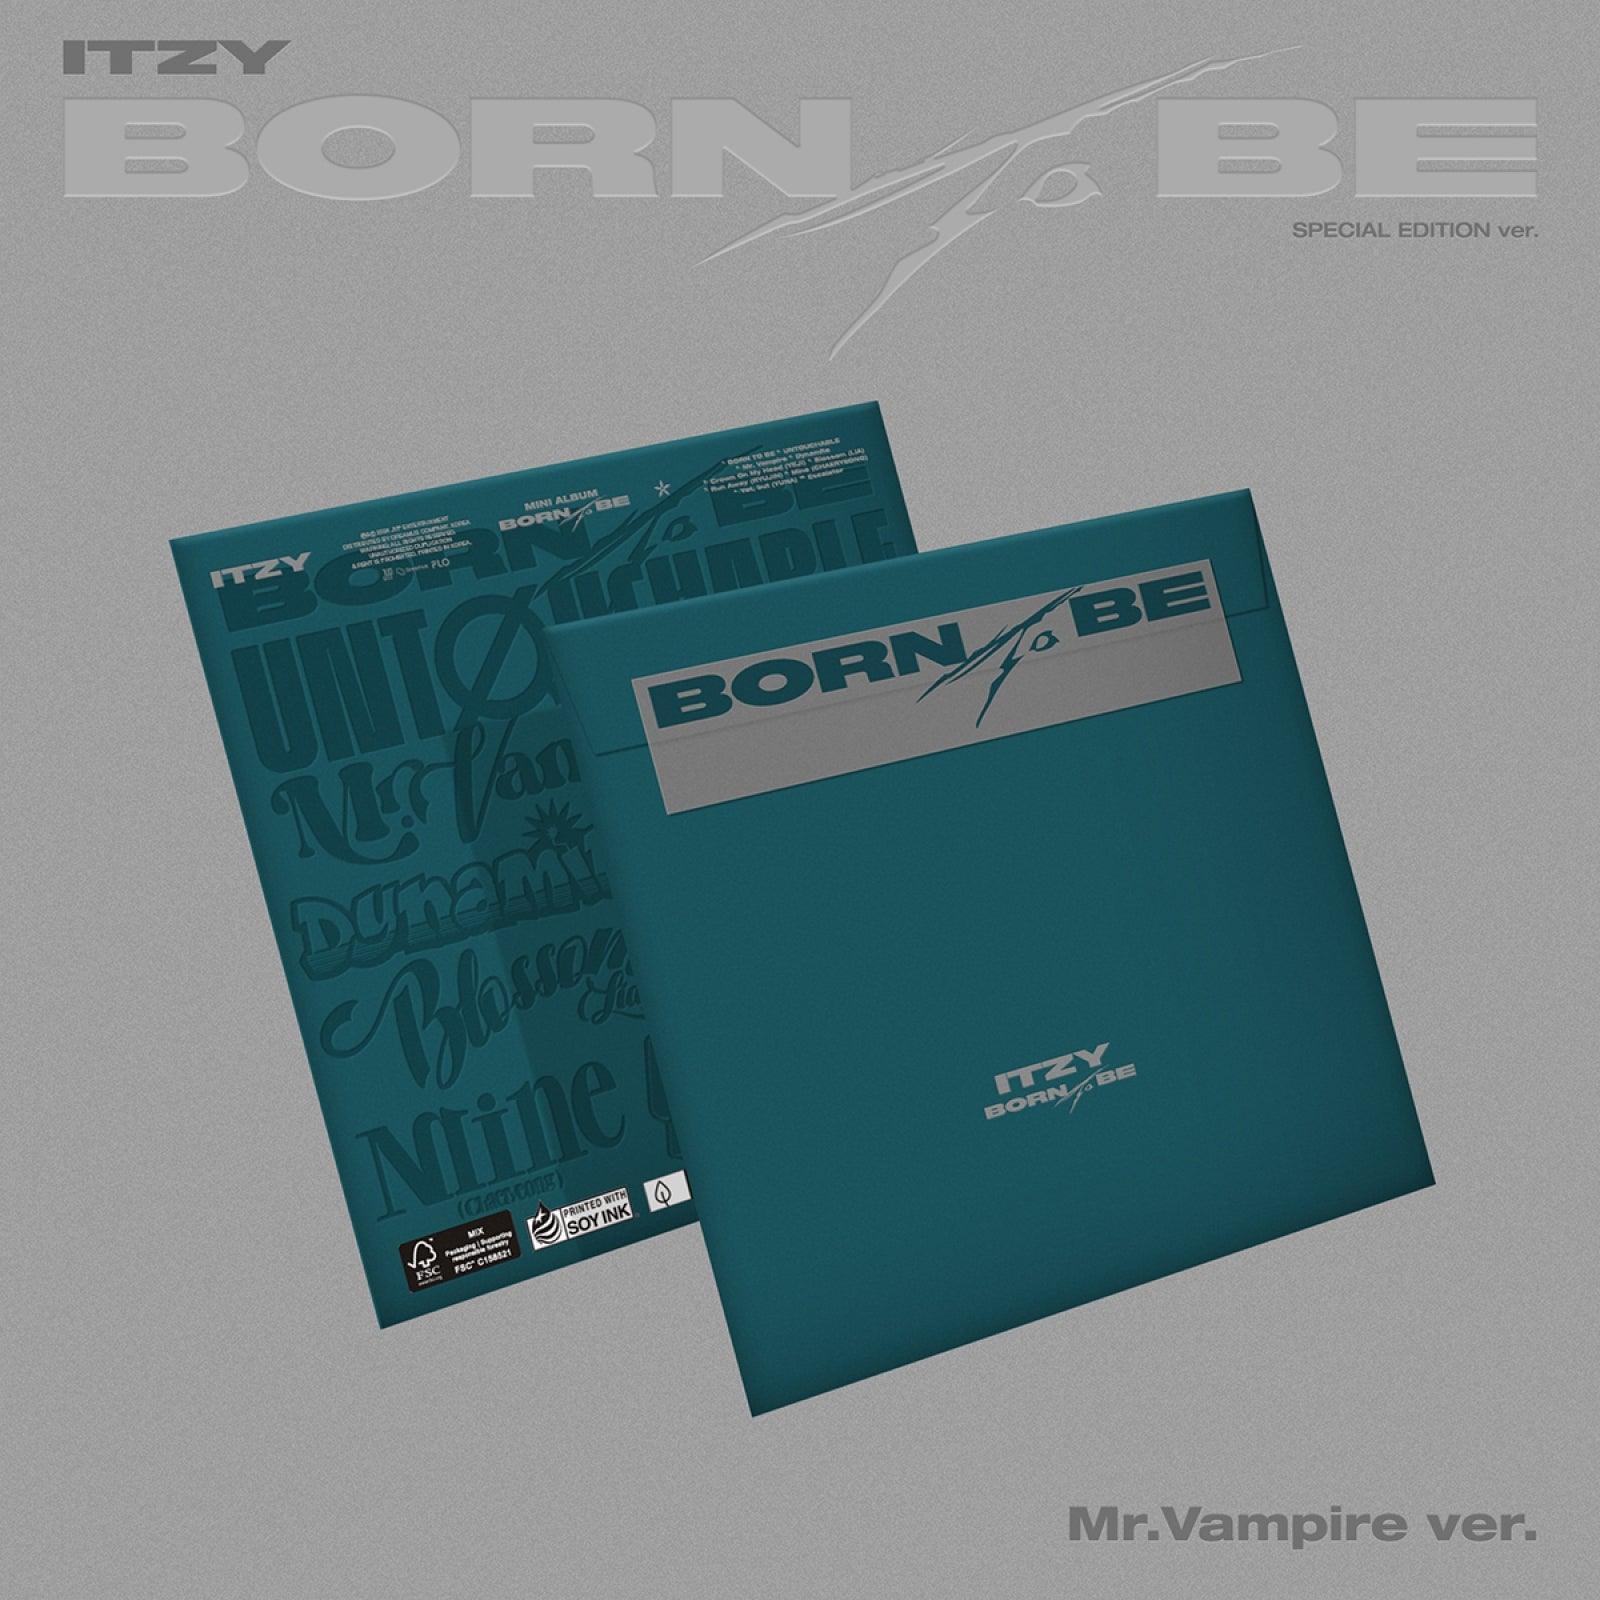 ITZY - BORN TO BE (SPECIAL EDITION) (Mr. Vampire Ver.) - Shopping Around the World with Goodsnjoy